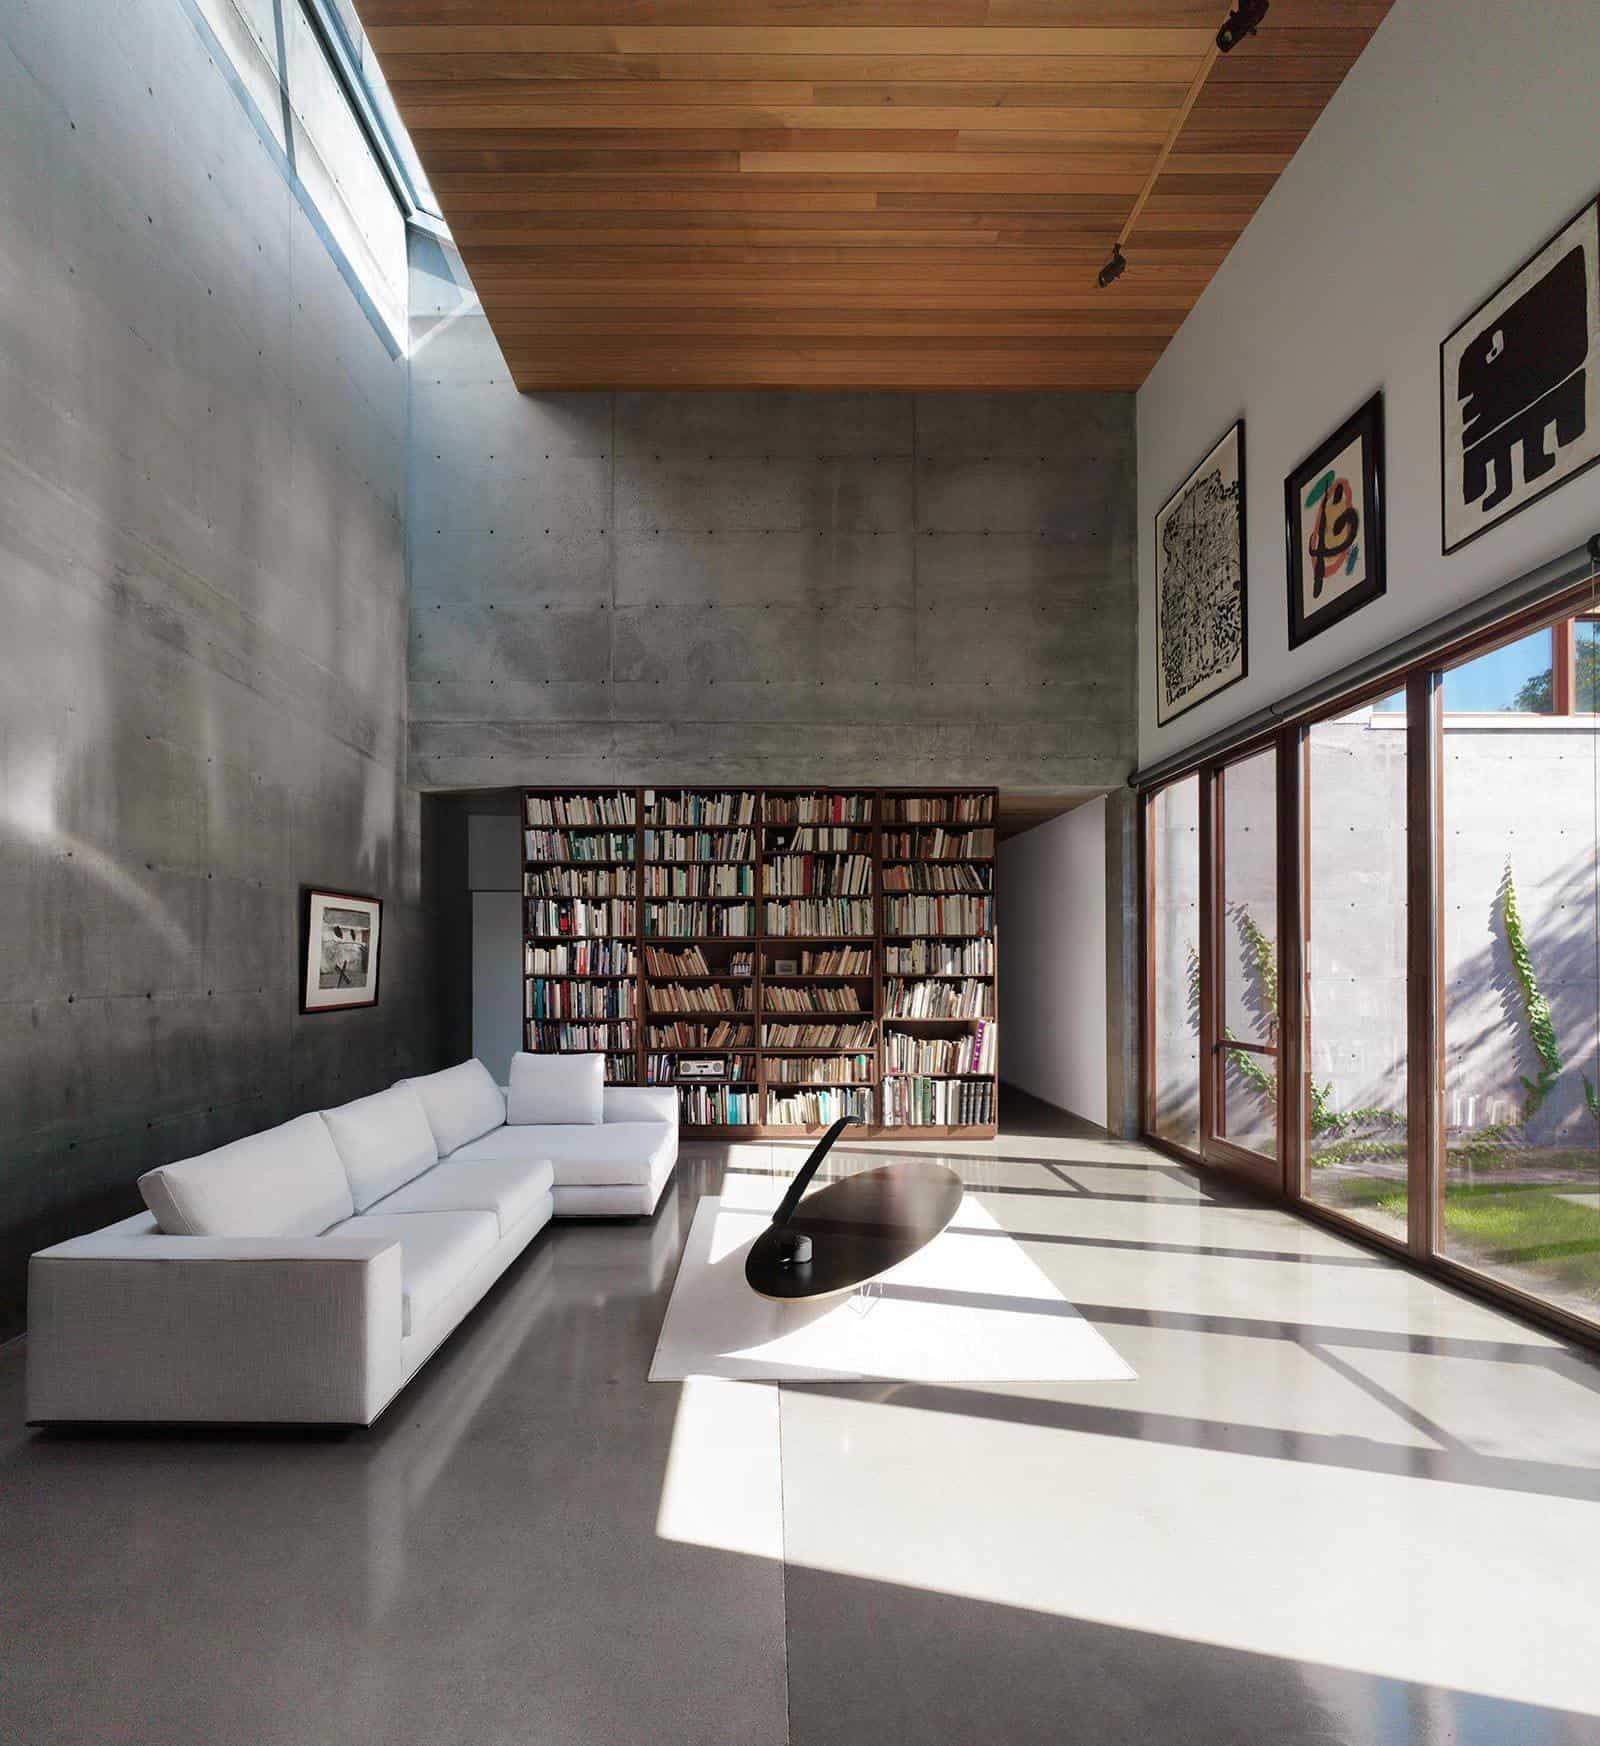 Minimalist dwelling in Montreal designed with concrete and wood